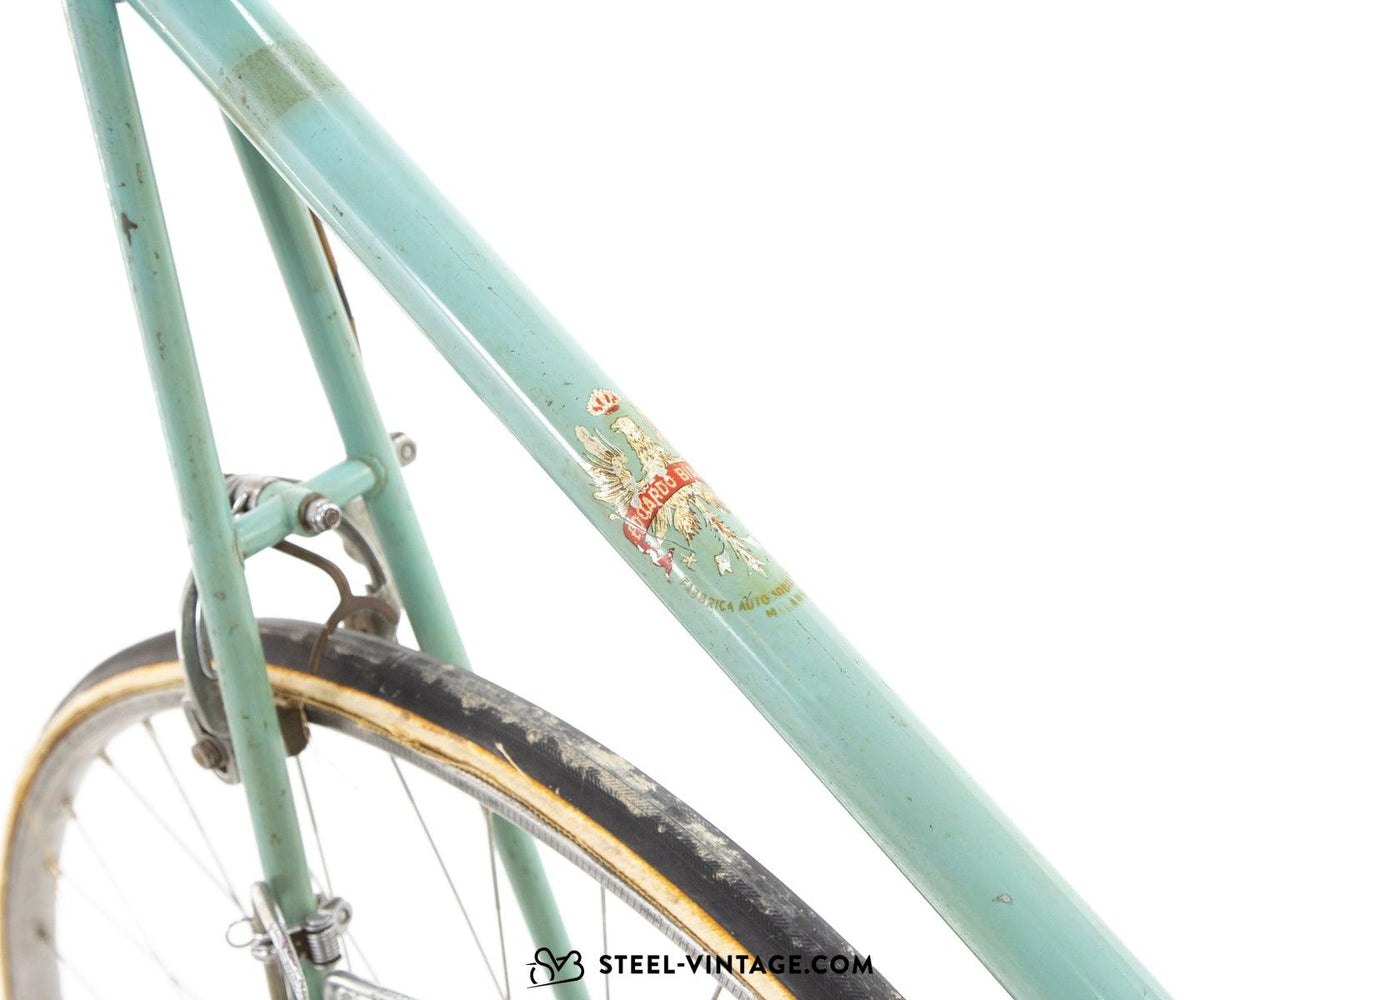 Fausto Coppi Personal Bianchi Road Bicycle 1946 - Steel Vintage Bikes